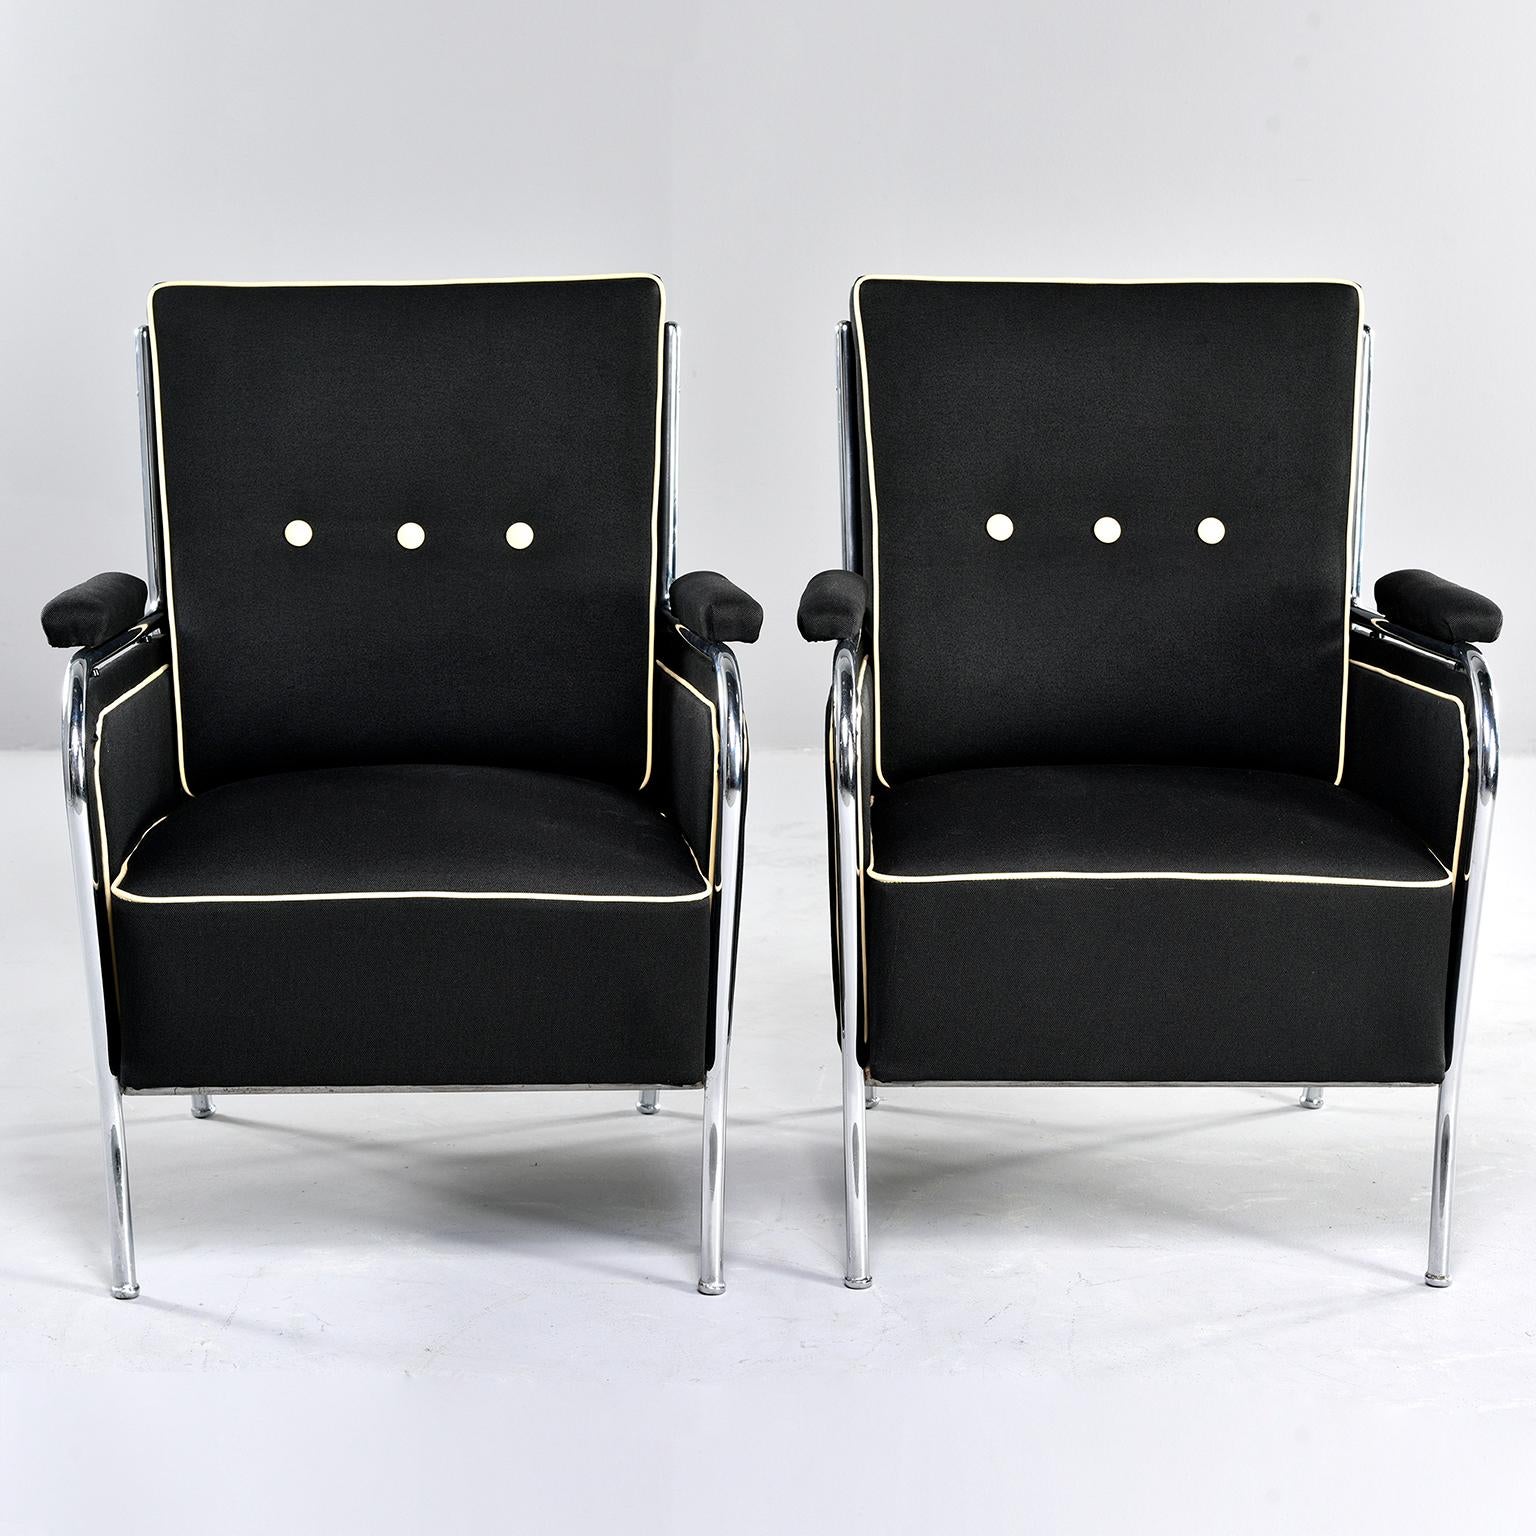 Pair of French chrome-framed club chairs have been newly upholstered, circa 1940s. Black cotton blend fabric has a slubby texture and chairs are trimmed with contrasting ivory colored leather welting and buttons. Measures: Padded arms are 24.75”